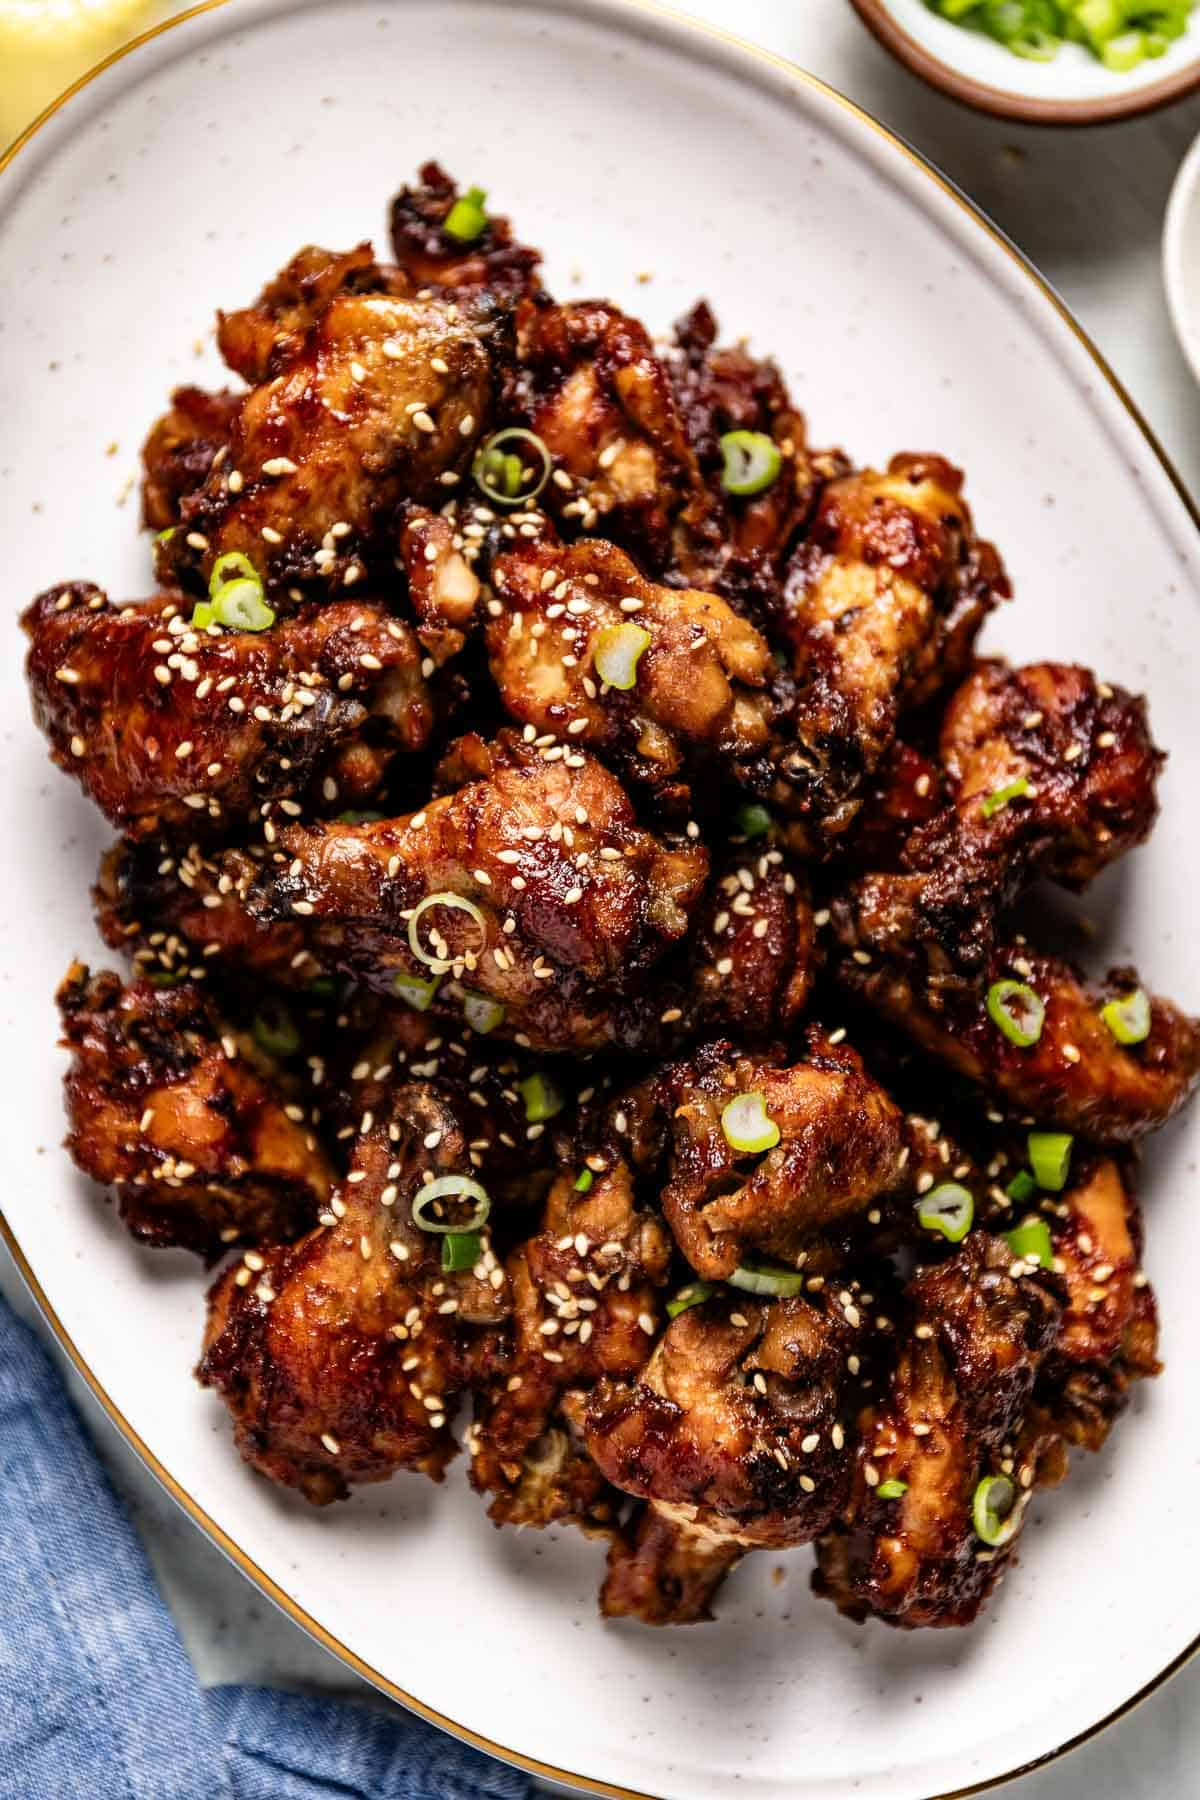 Slow Cooker Asian Chicken Wings on a plate from the top view.